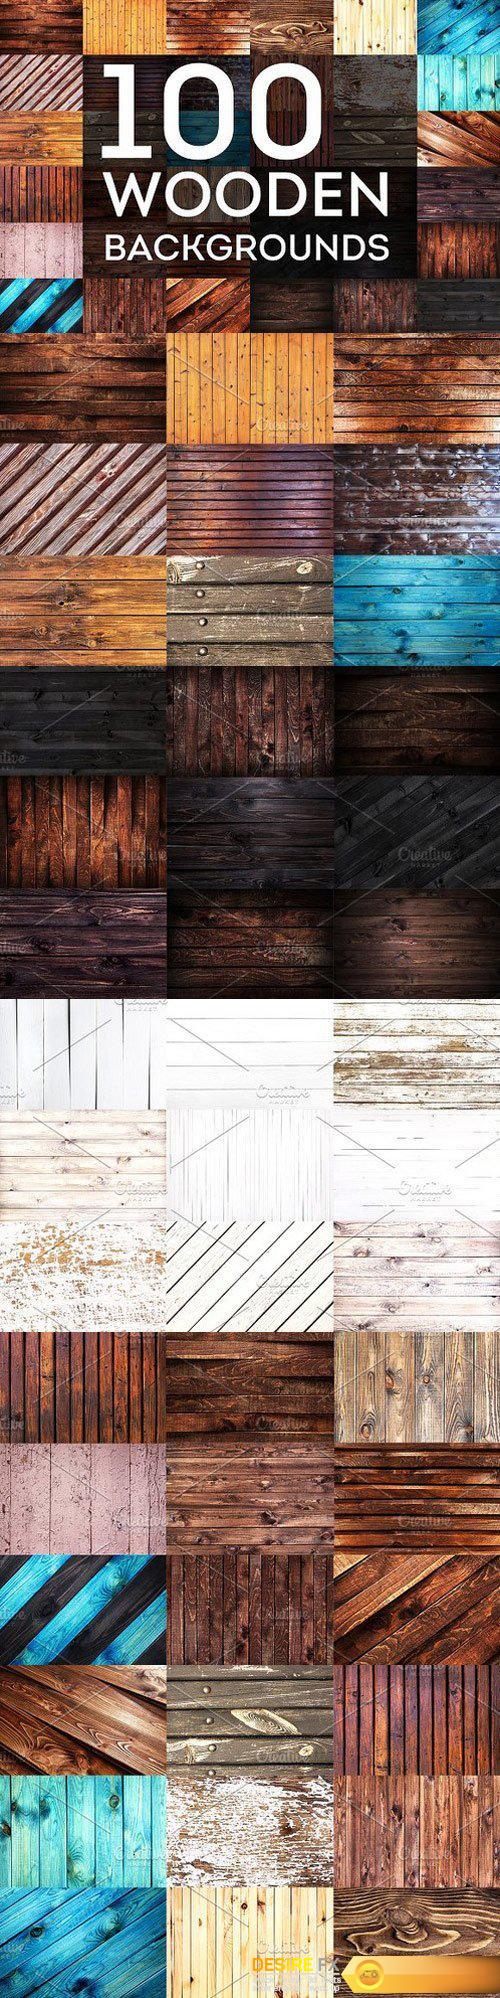 CM - 100 Wooden backgrounds 1504645